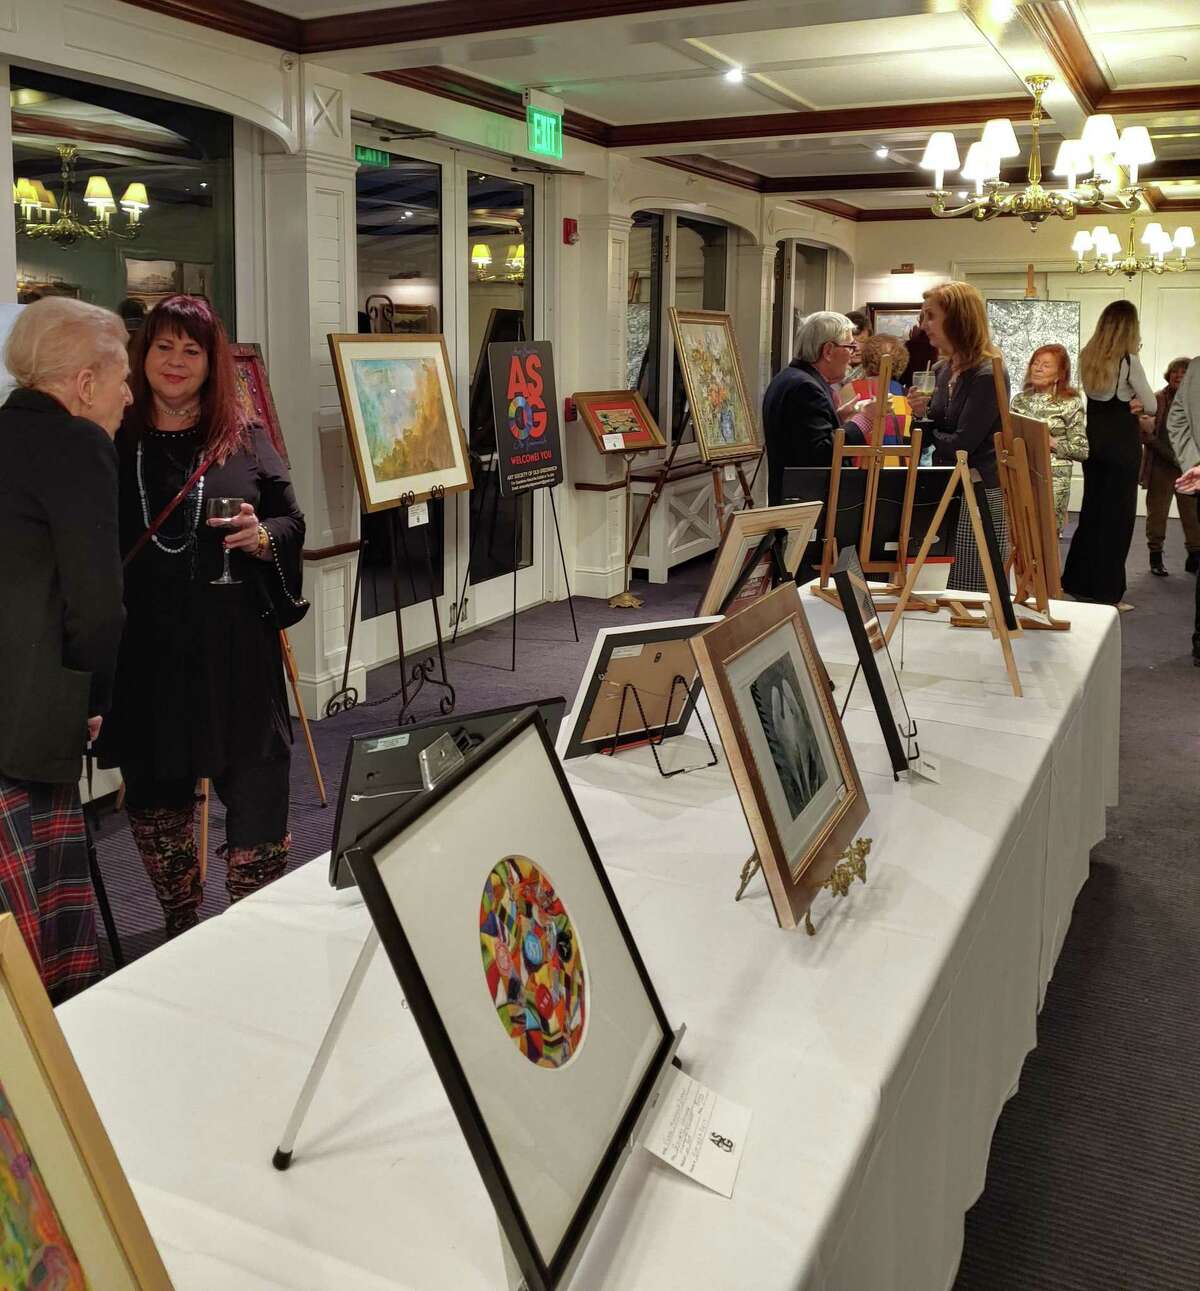 The art exhibit at ASOG 2020 Winterfest, where artists enjoyed chatting and viewing the artworks.